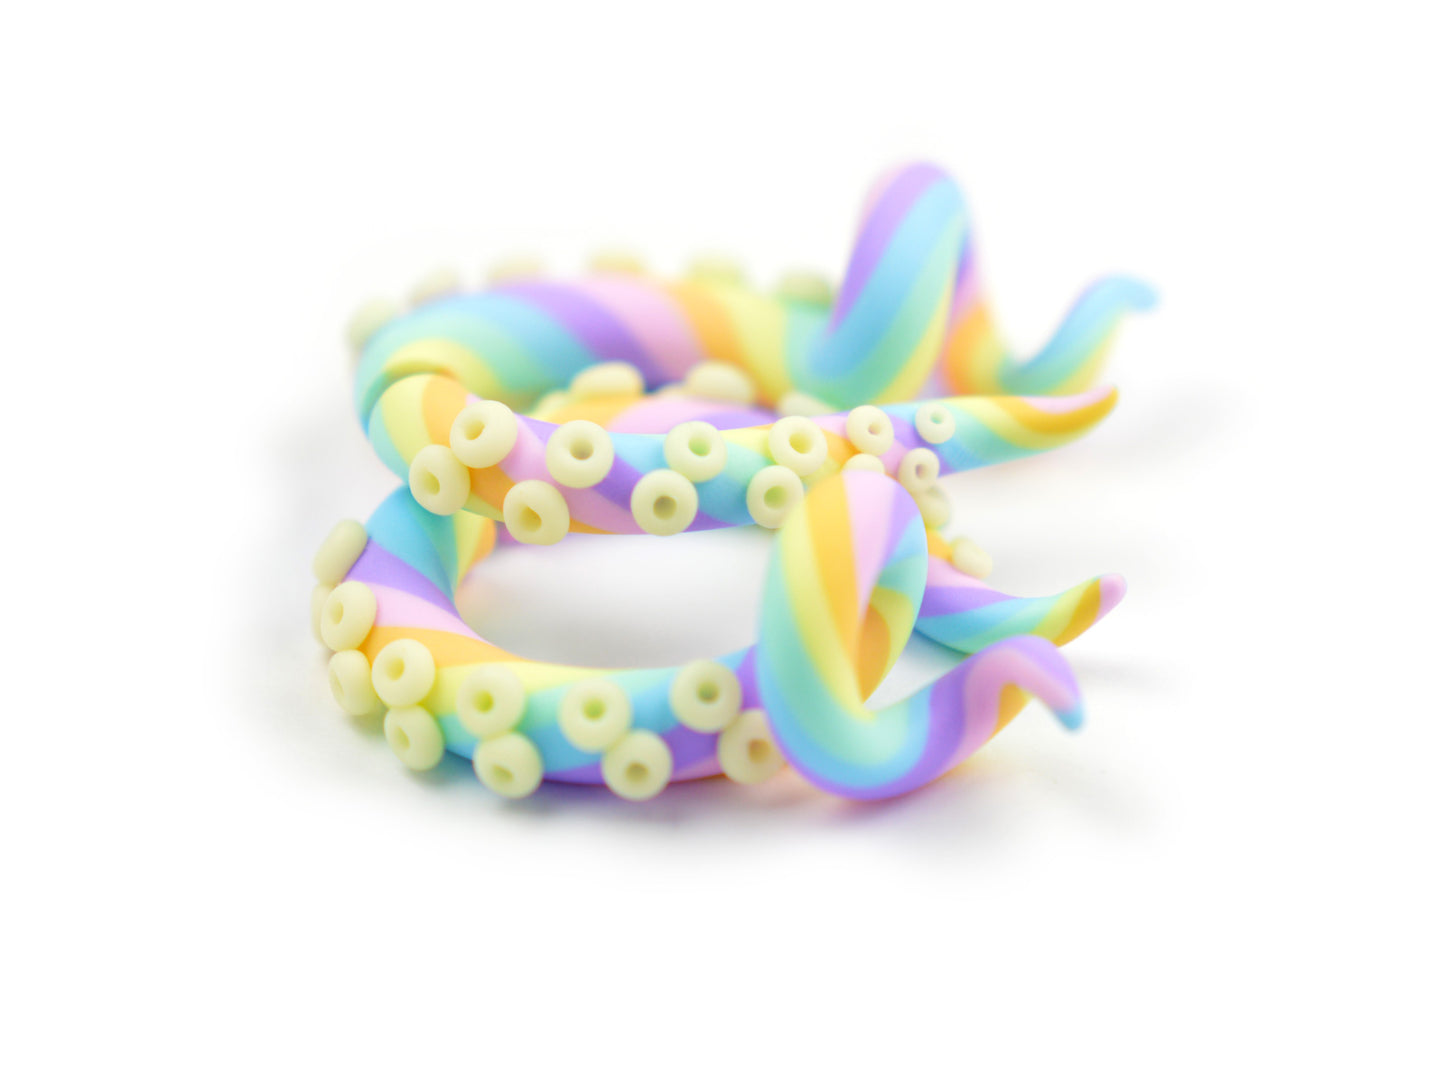 Pastel Goth Rainbow Octopus Tentacle Earrings for Yami Kawaii Outfit